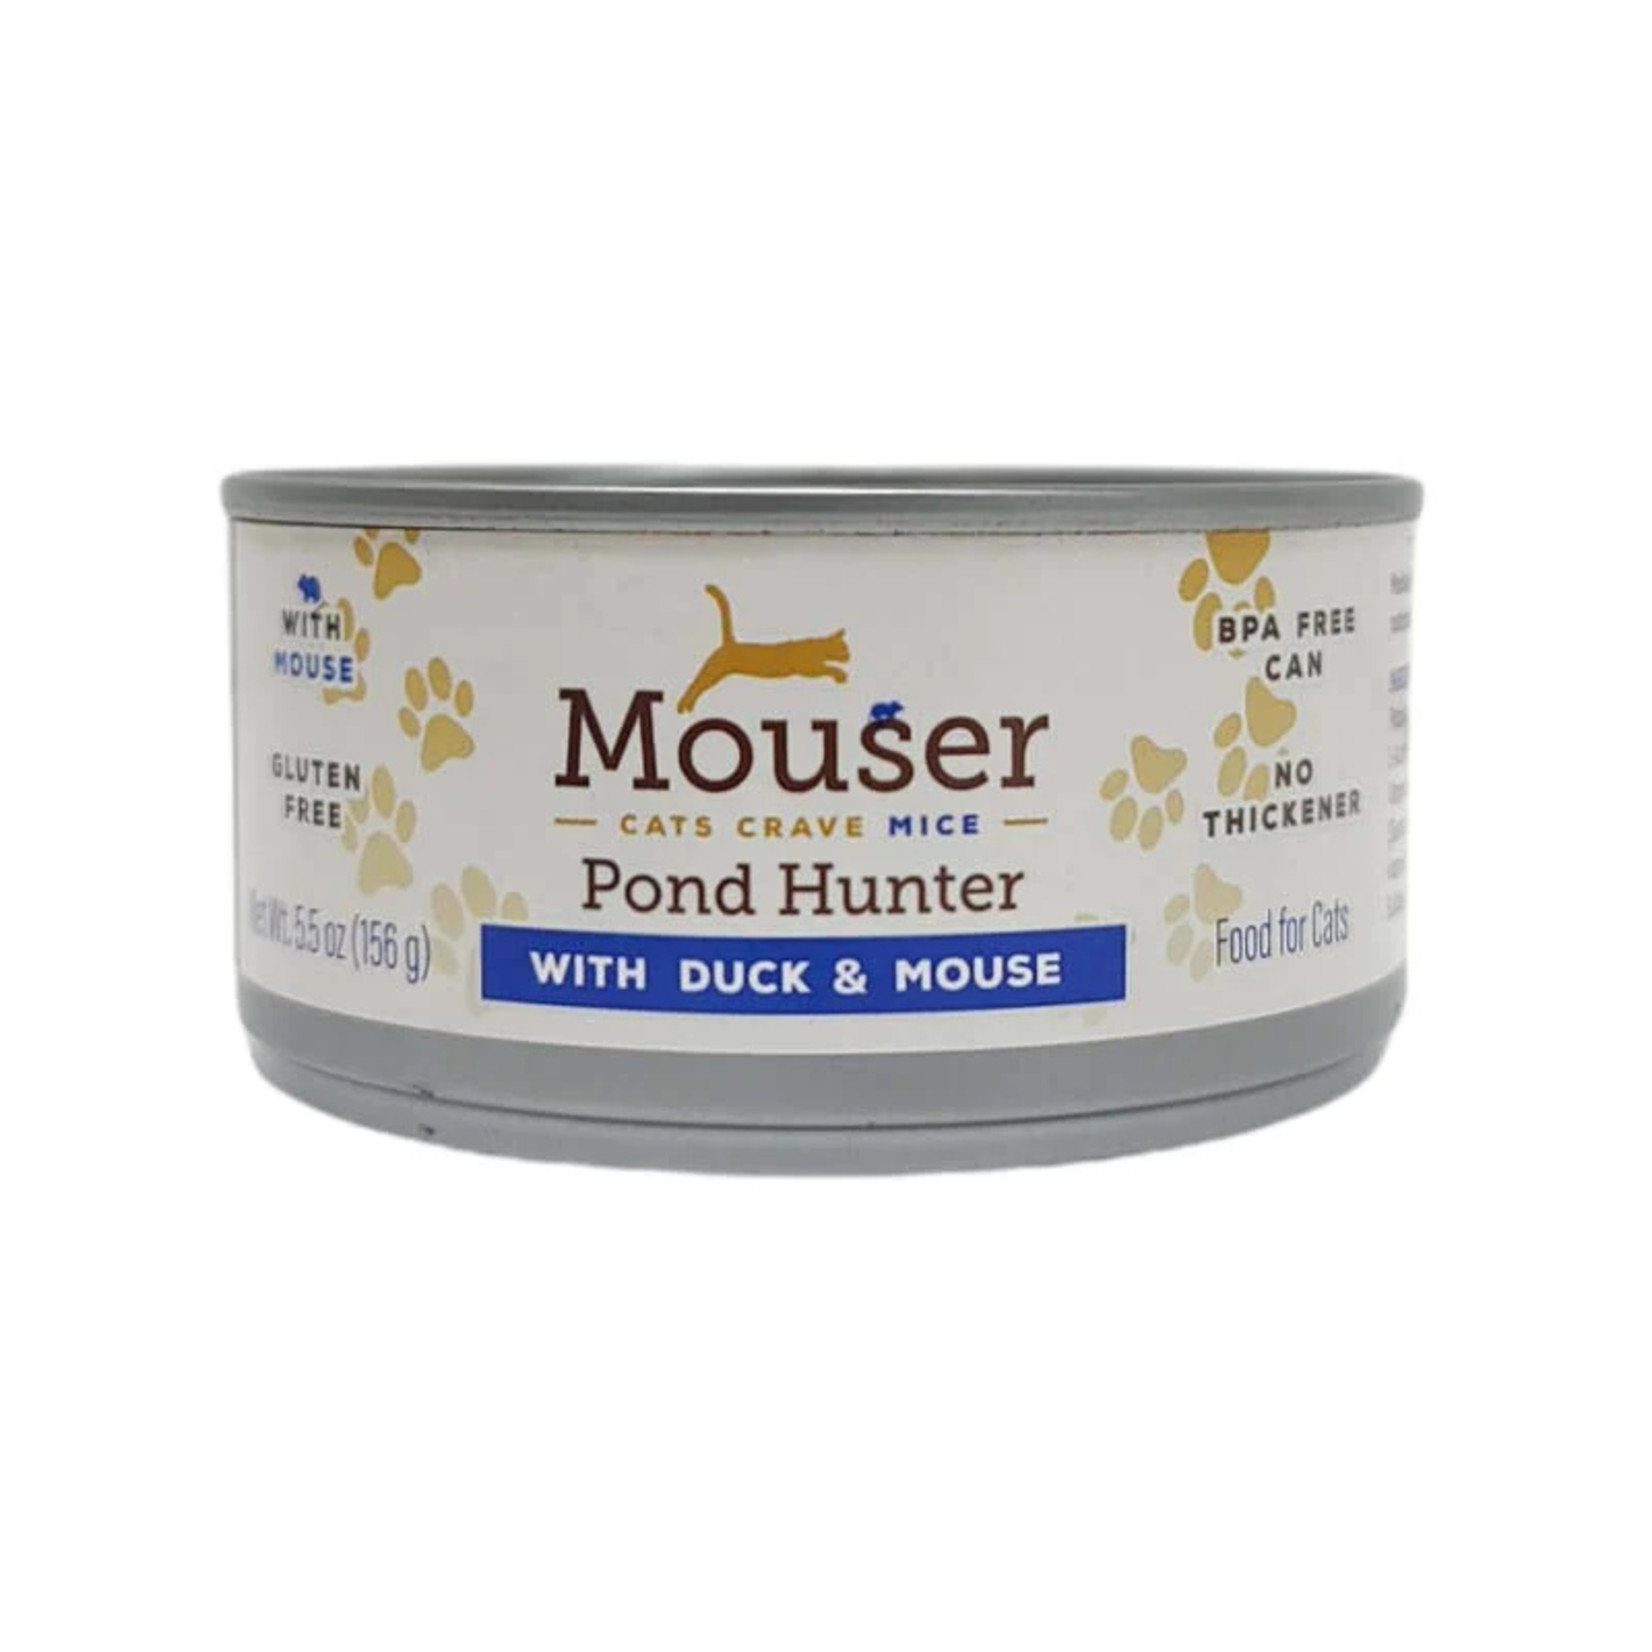 Mouser Mouser Pond Hunter Duck & Mouse Food for Cats